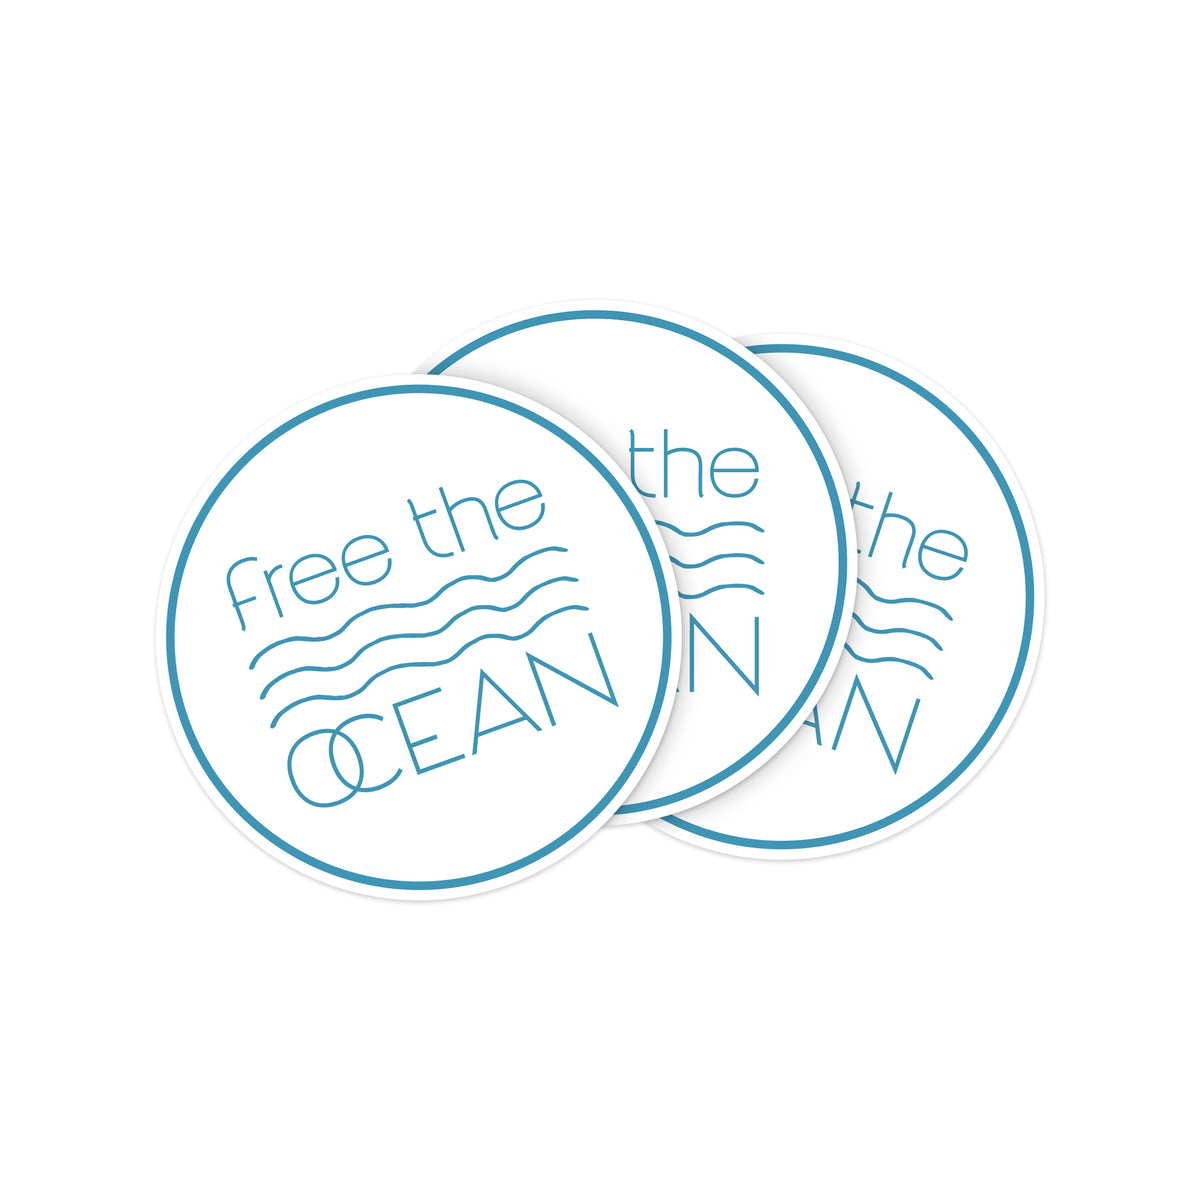 Free the Ocean Stickers